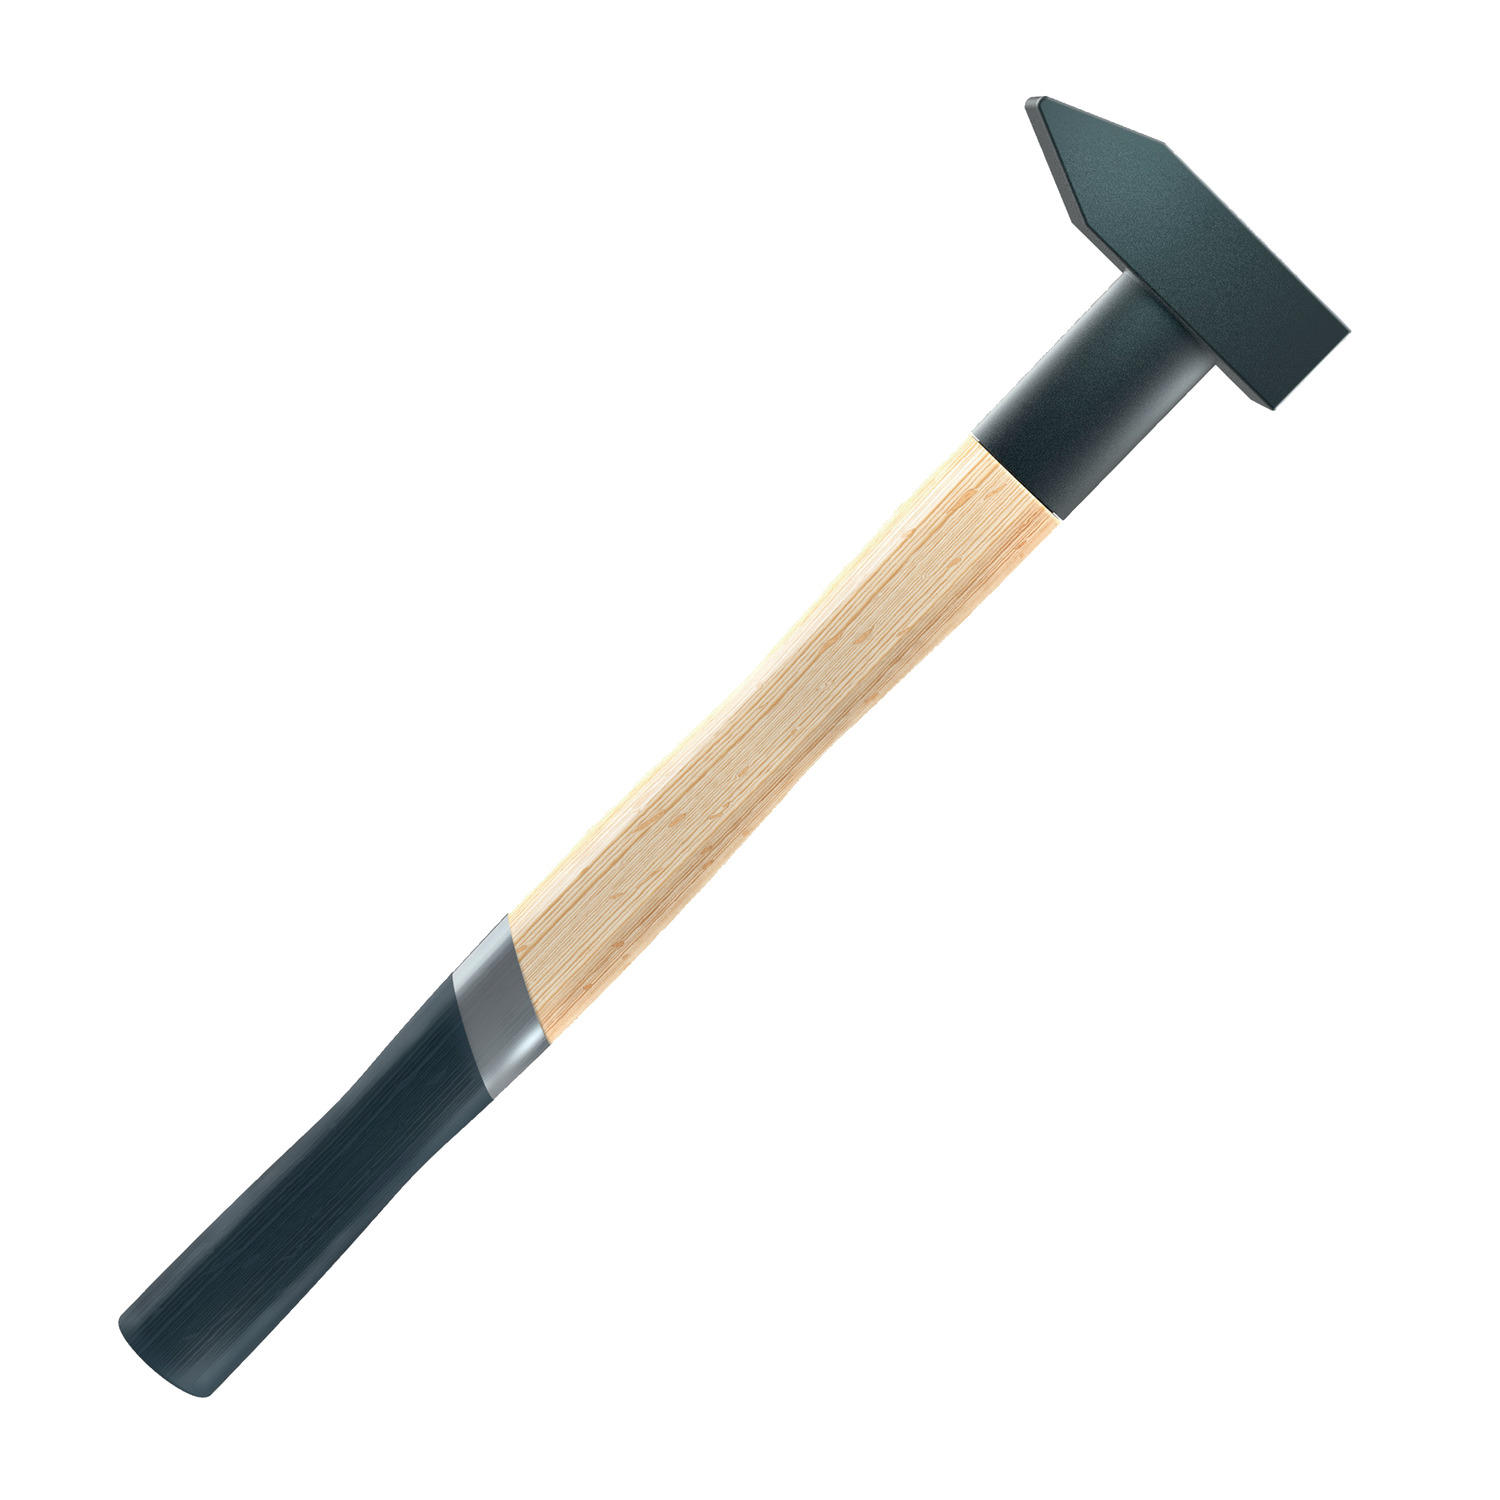 Product 98501, Maxx Craft Hammer - Complete cast iron head - wooden handle / 